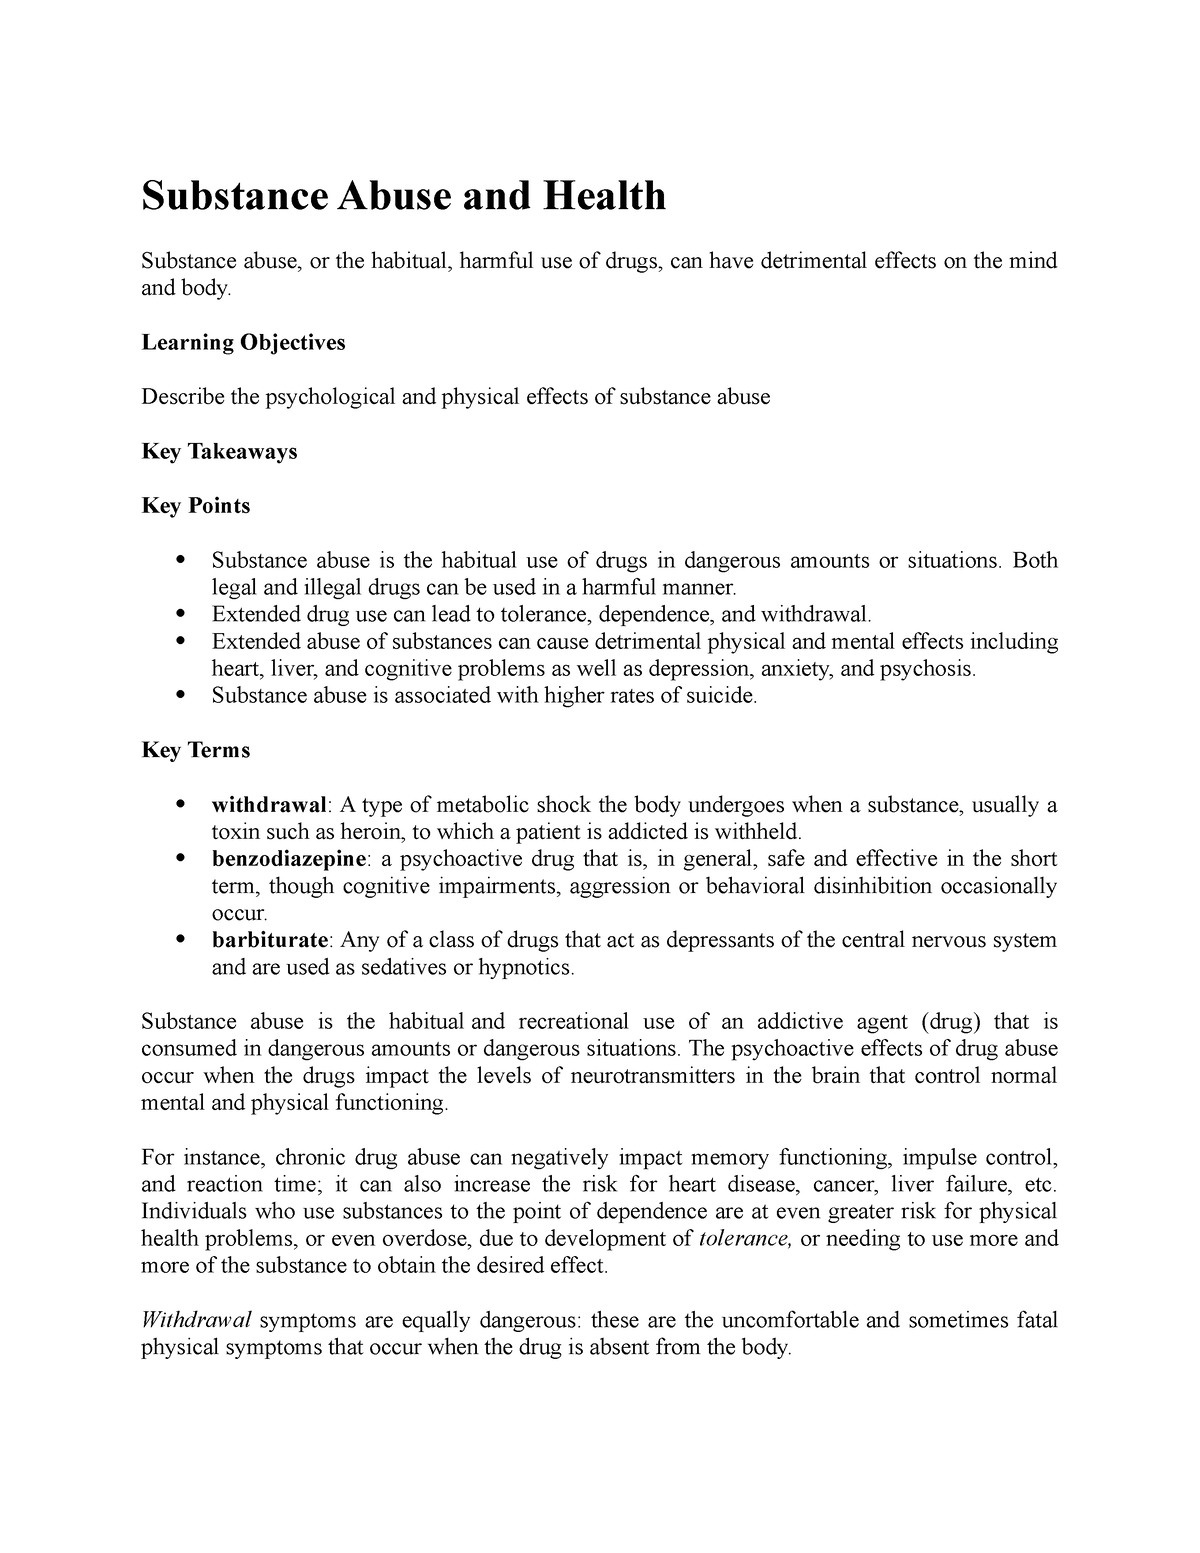 thesis on substance abuse pdf